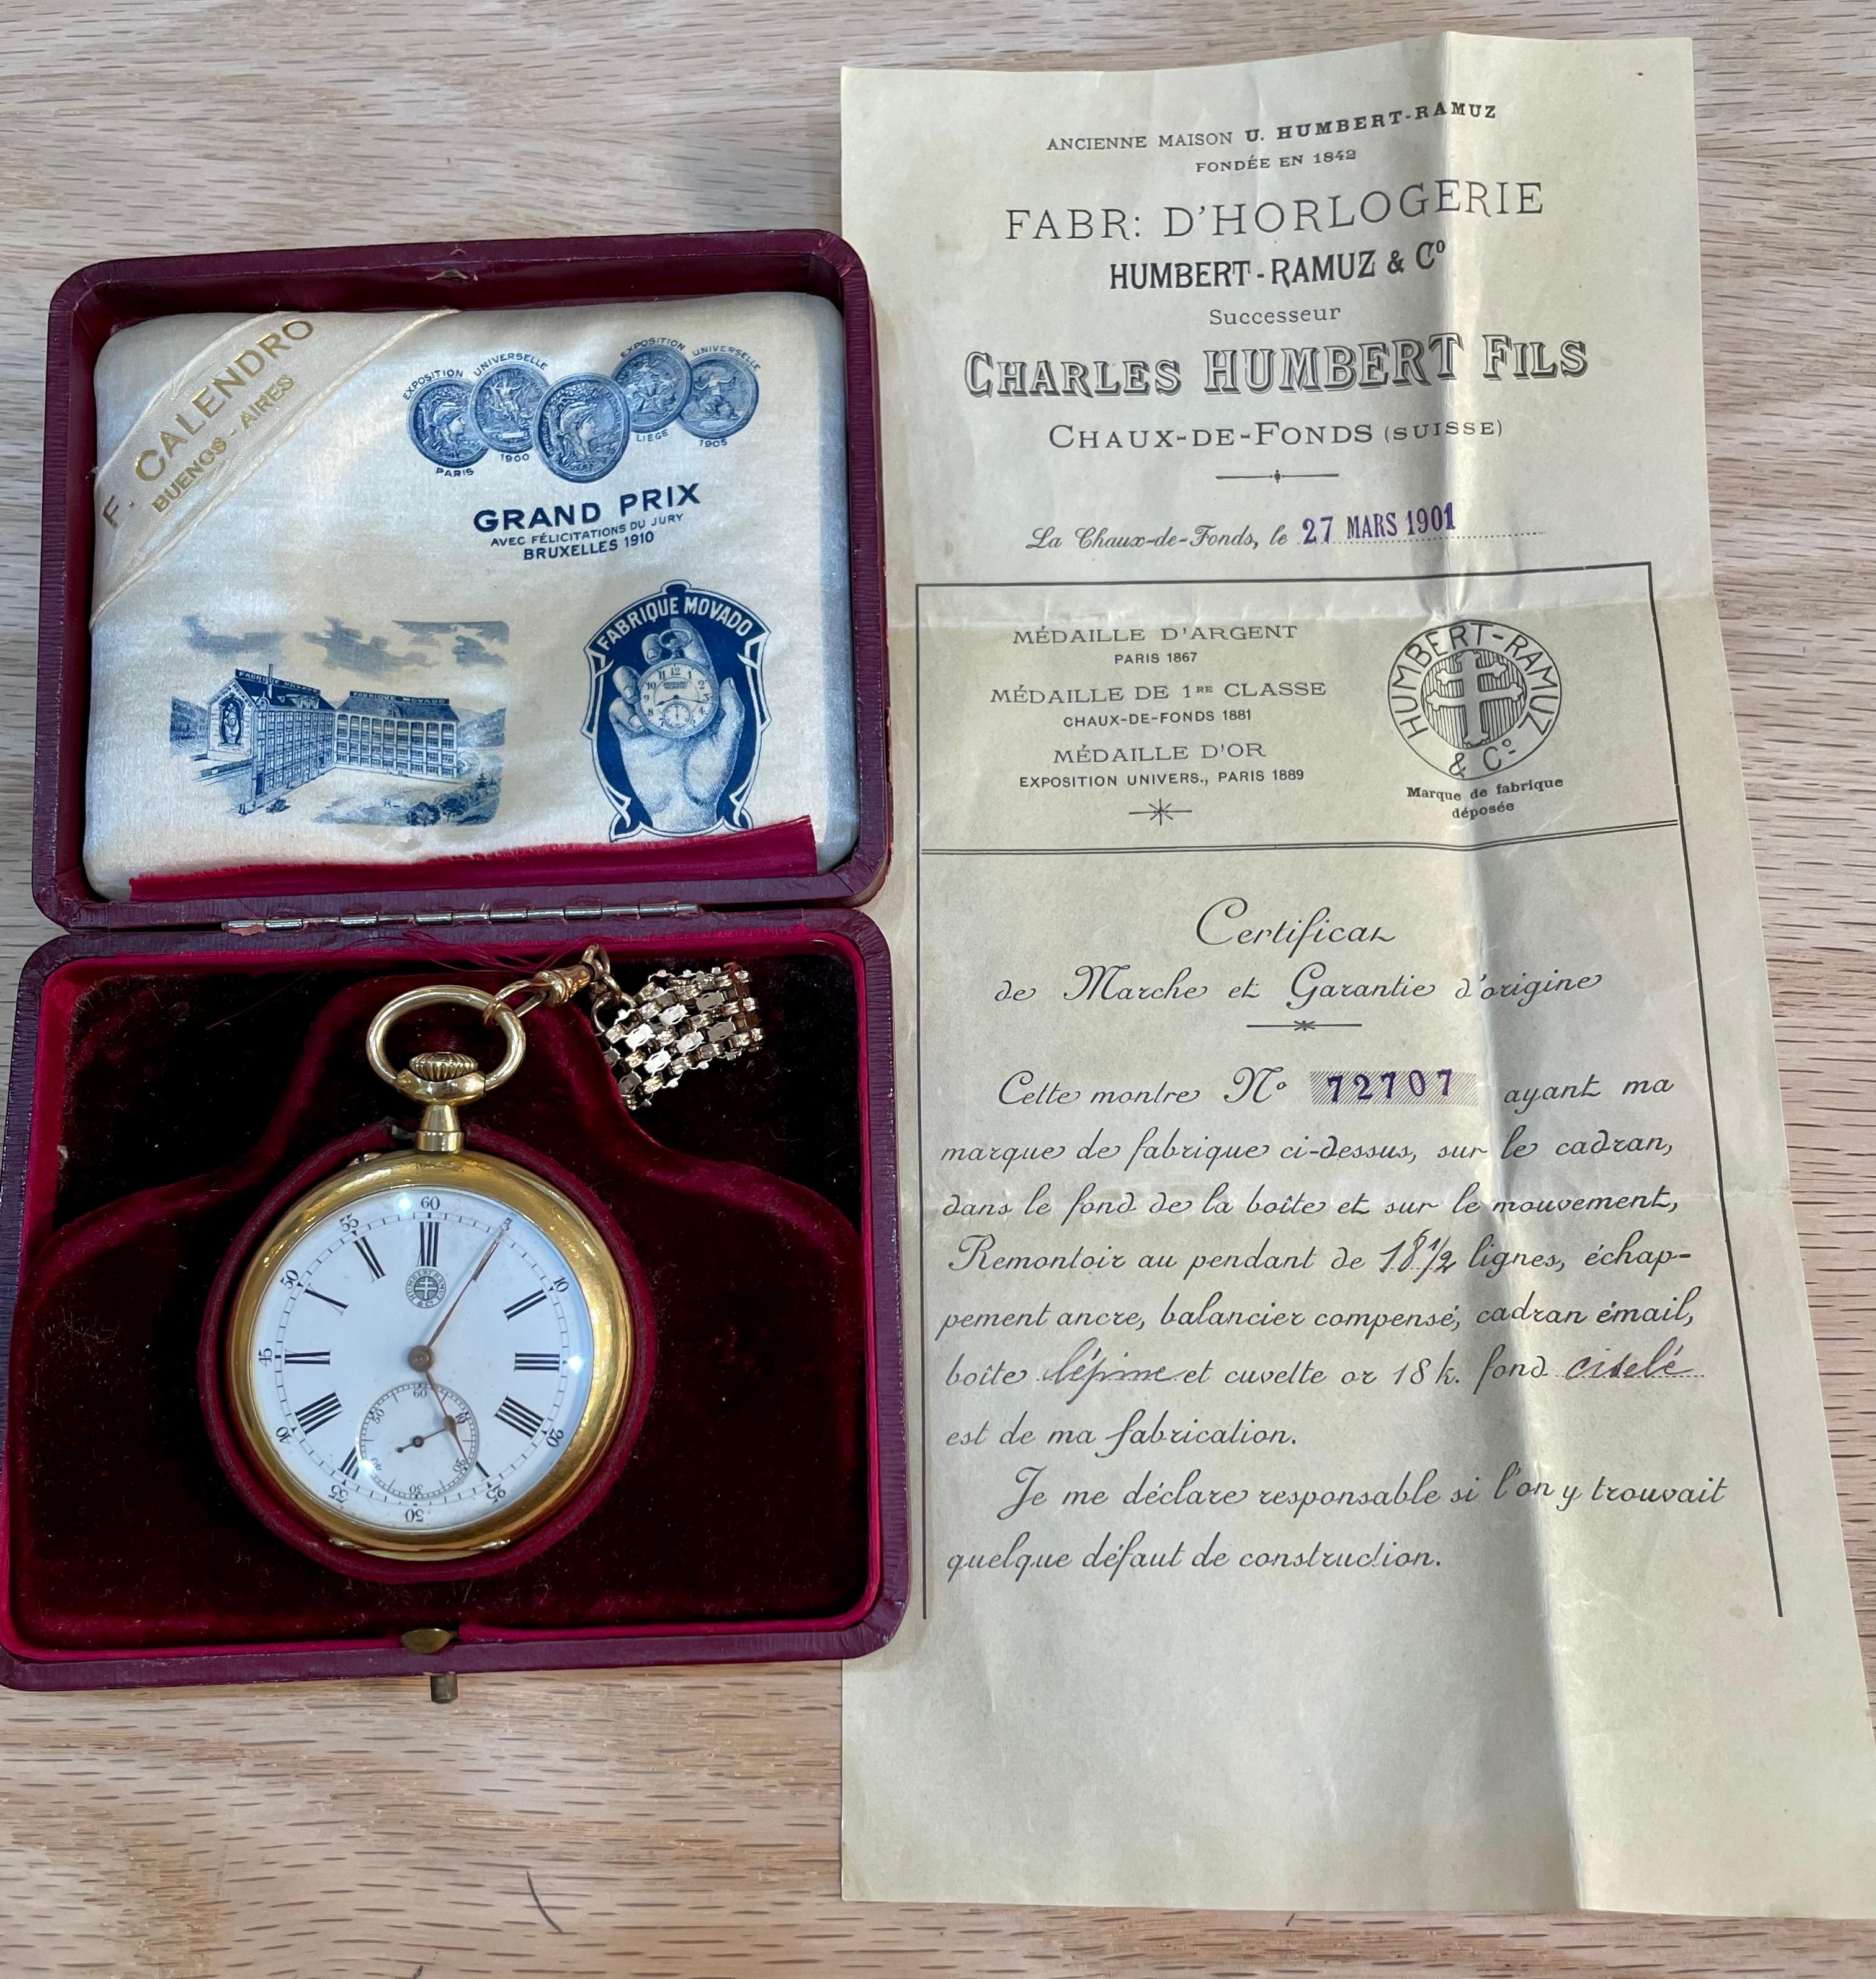 Rare 18kt yellow gold Charles Humbert Fils pocketwatch with original box and papers dated in 1901 

Original Receipt with serial number and date included in box.

Paris Made

Light visible wear in estate condition

Keyless lever entry pocket watch


